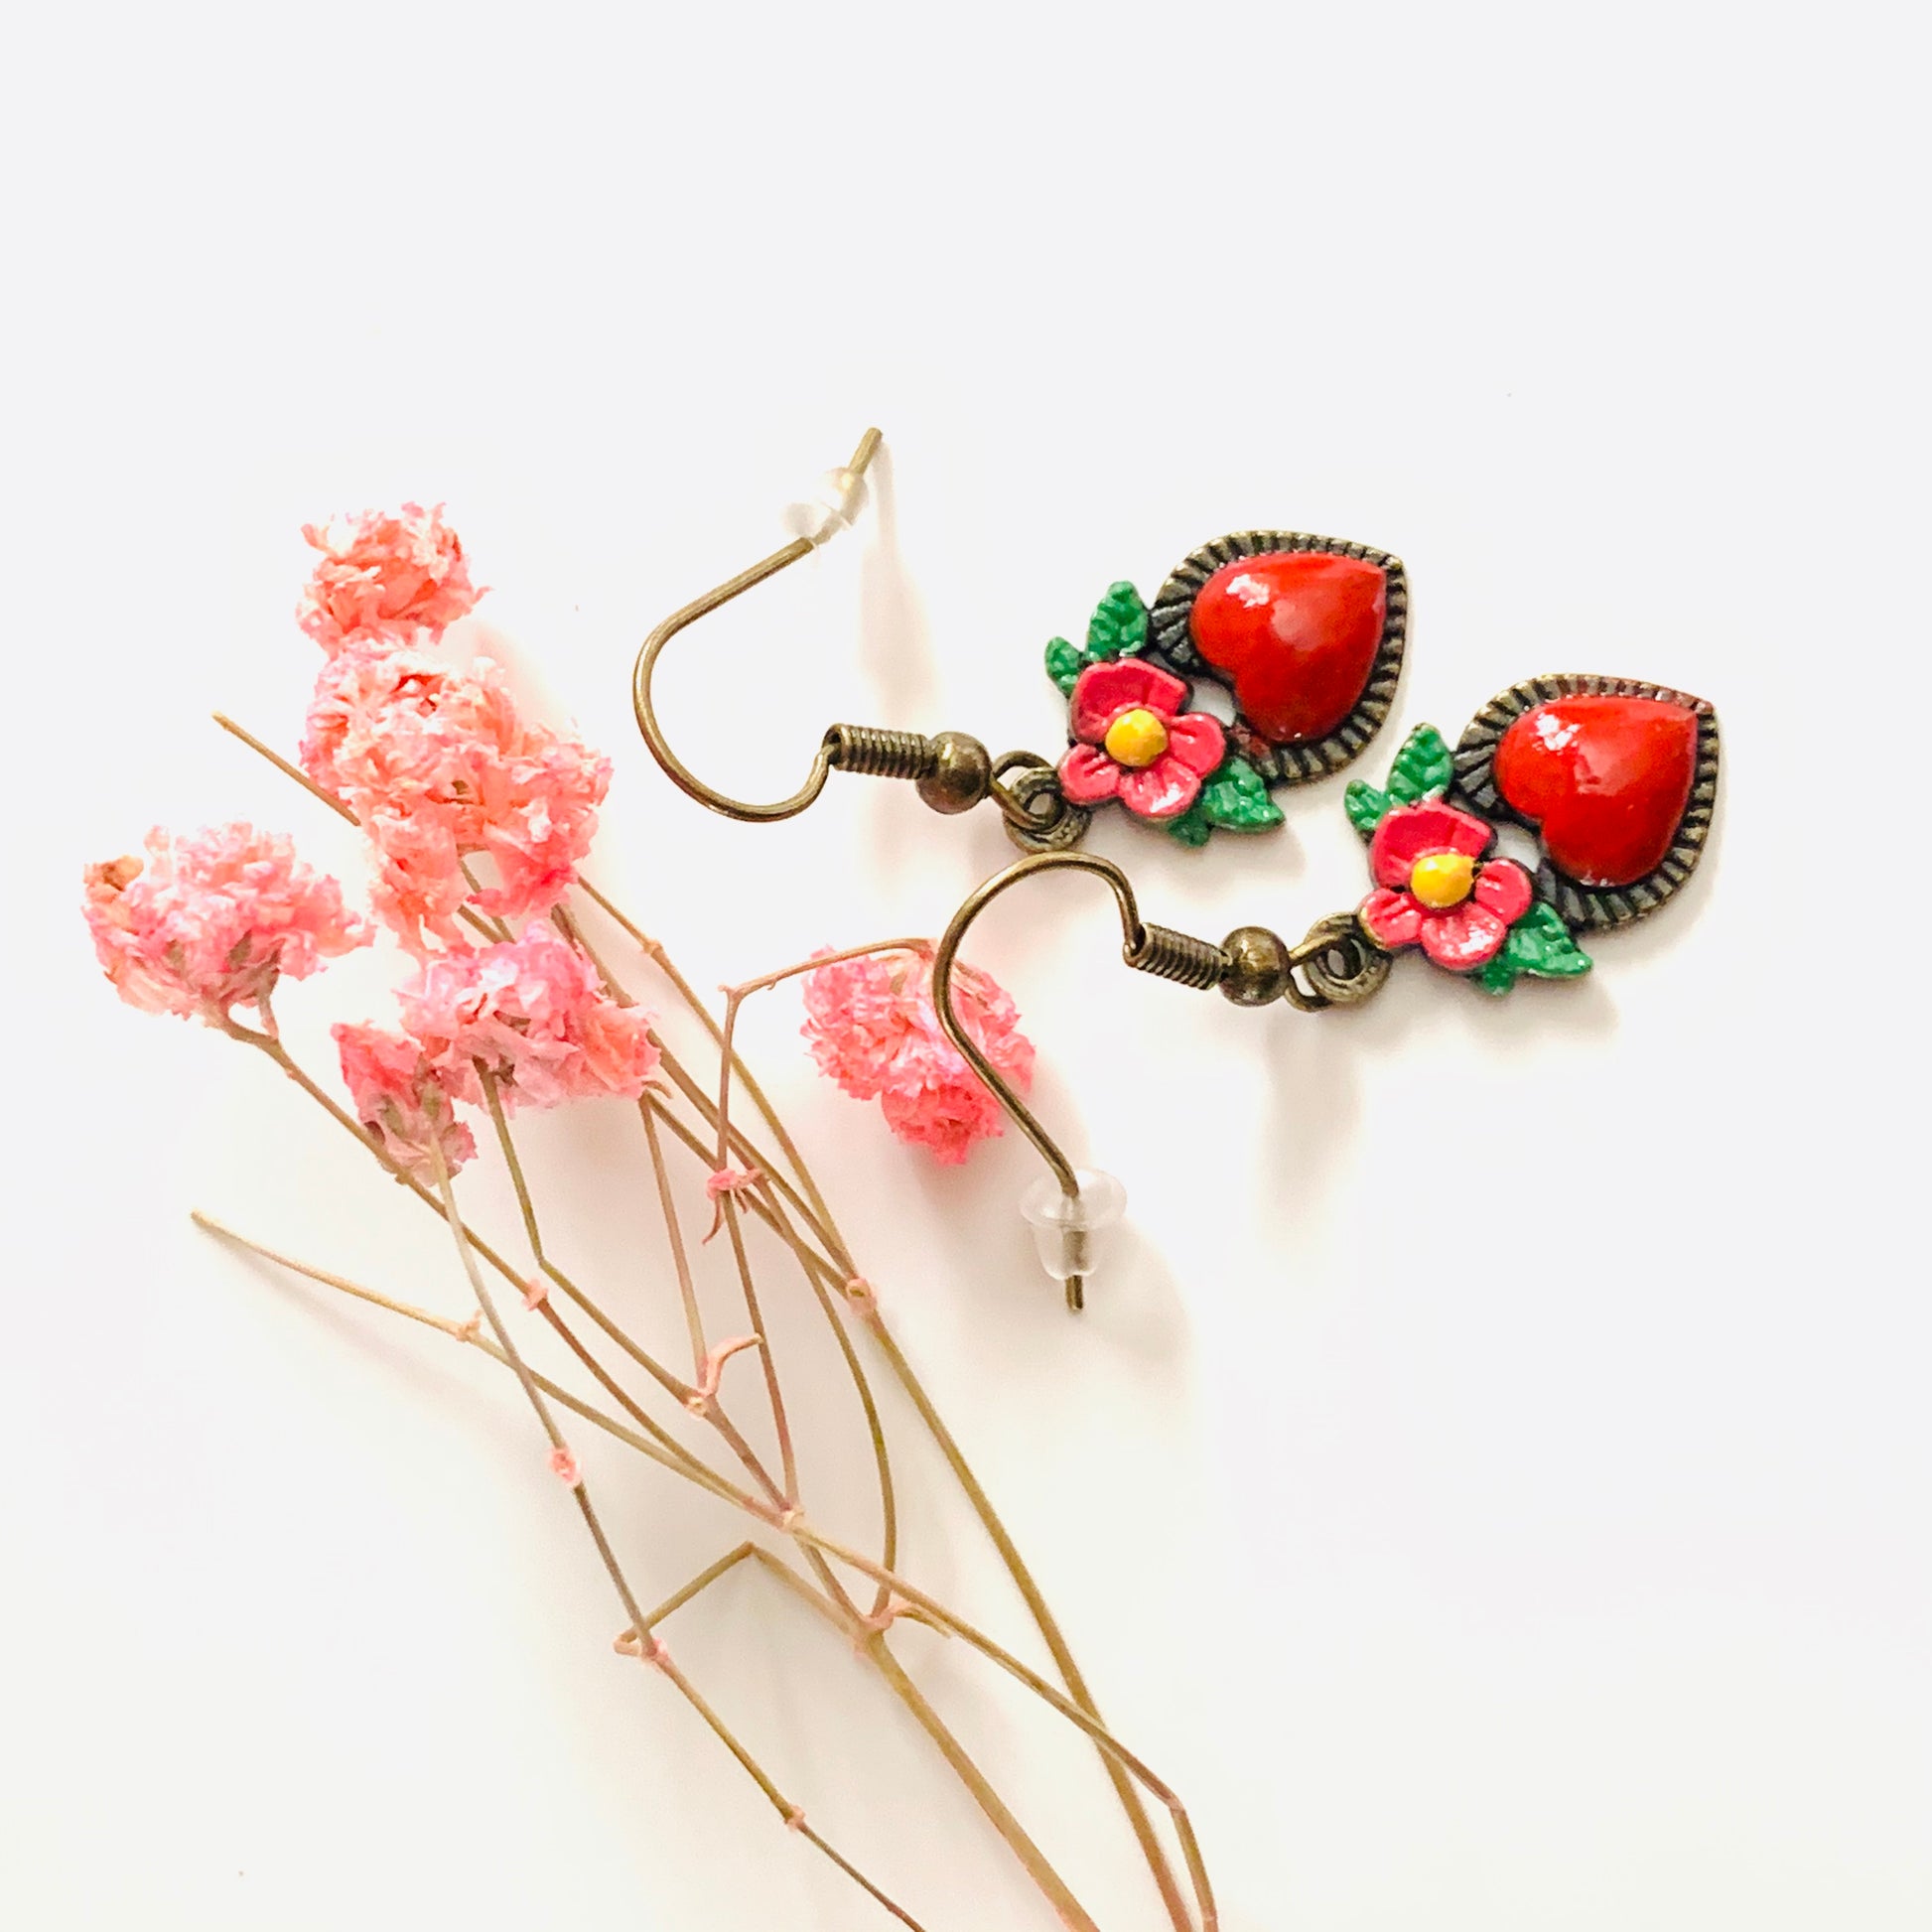 Bronze hand painted heart and flower earrings. Red, pink, green, and yellow paint. Mexican earrings. Mexican jewelry for fridamaniacs, fridalovers, fridamania. Frida Kahlo. Mother's Day gift.